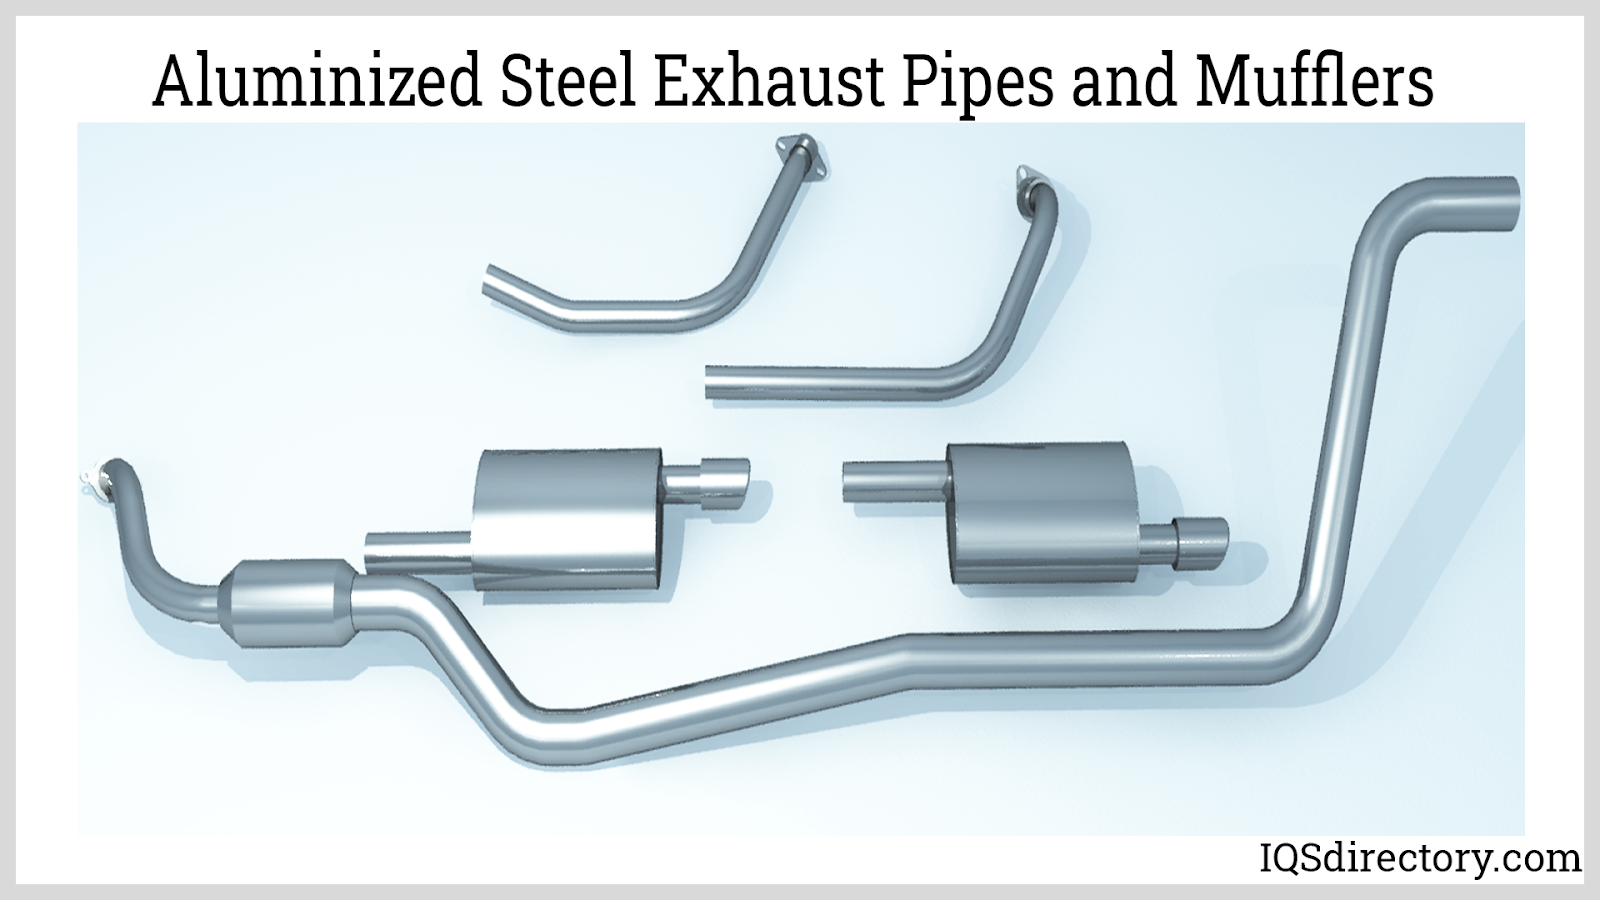 Aluminized Steel Exhaust Pipes and Mufflers